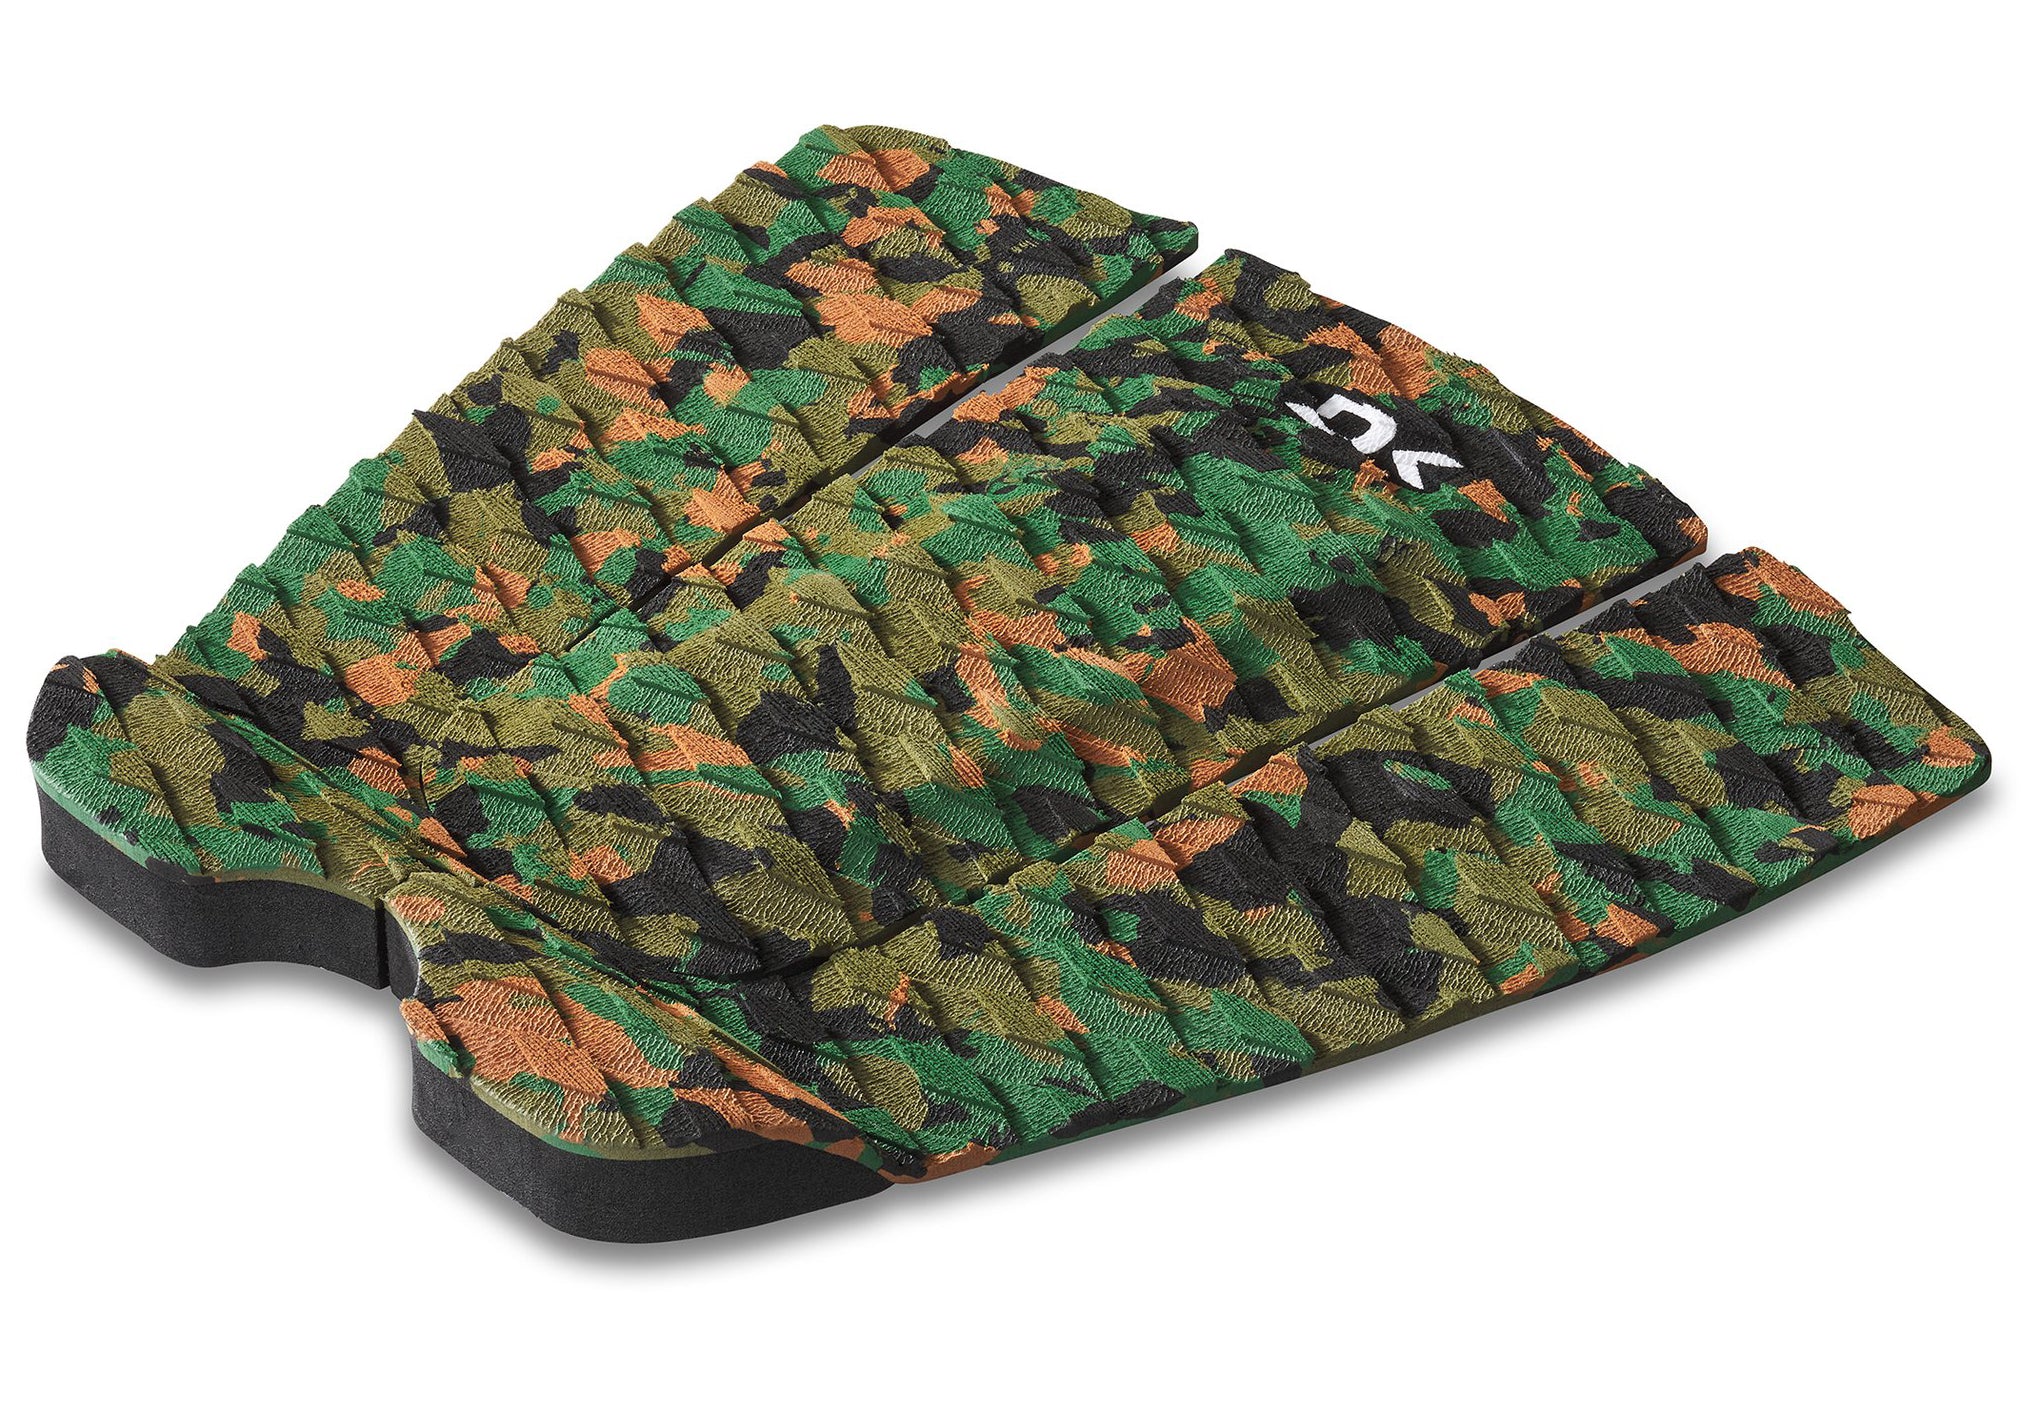 Dakine Andy Irons Pro Traction Pad 963-Olive Camo